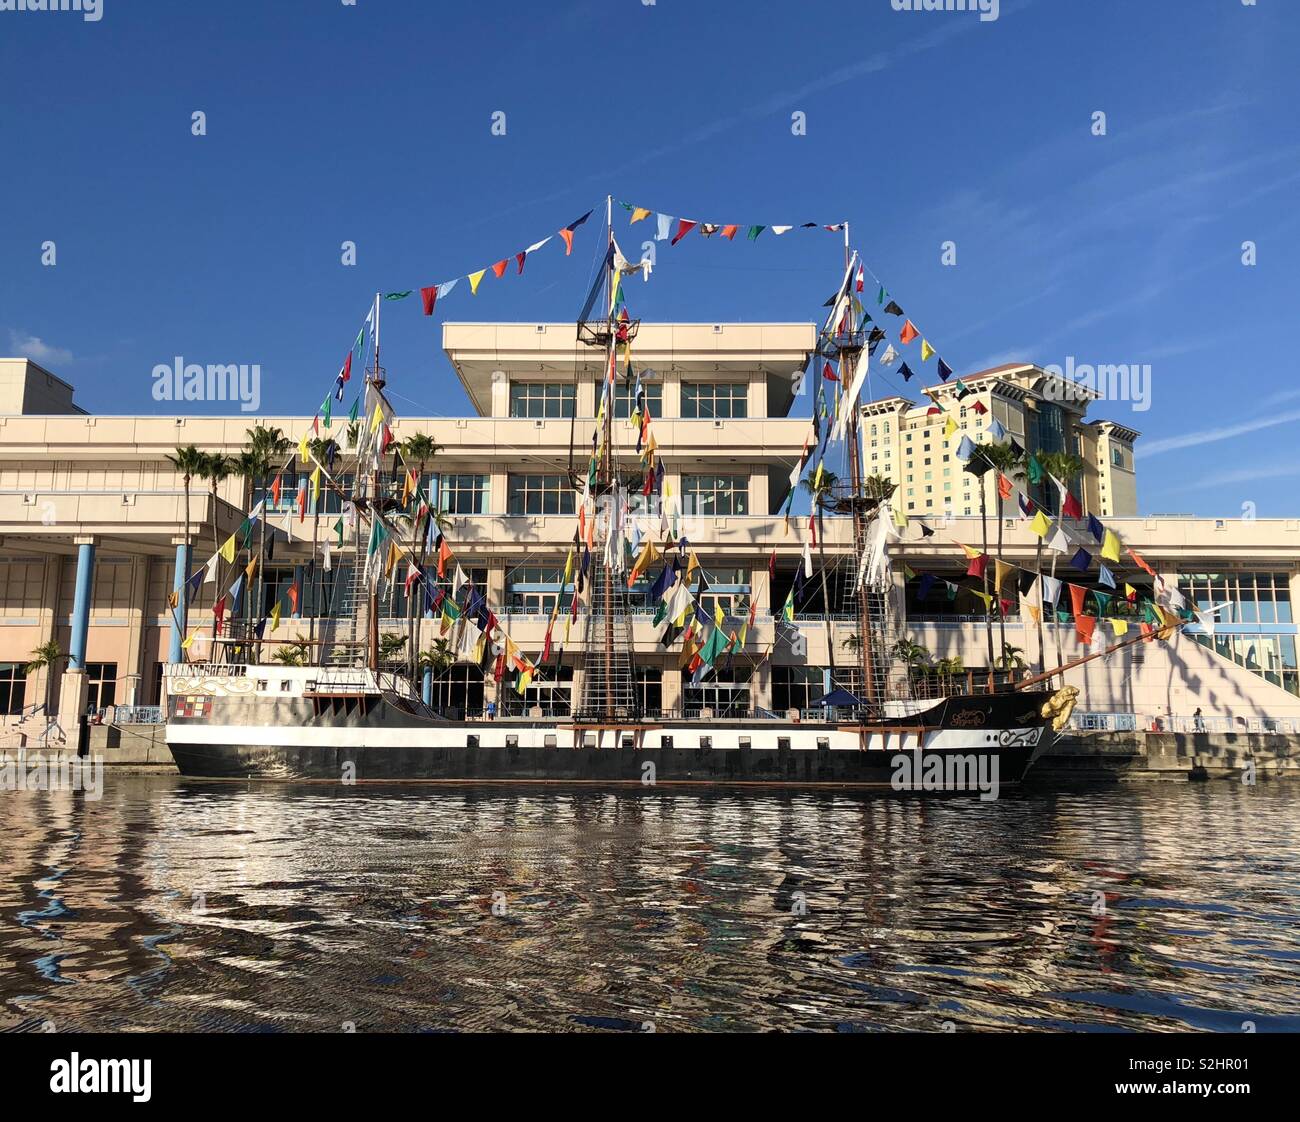 The Jose Gasparilla pirate ship sits docked along Tampa’s waterfront. The ship is the centerpiece of Tampa’s Gasparilla invasion and pirate festival that draws hundreds of thousands of people. Stock Photo